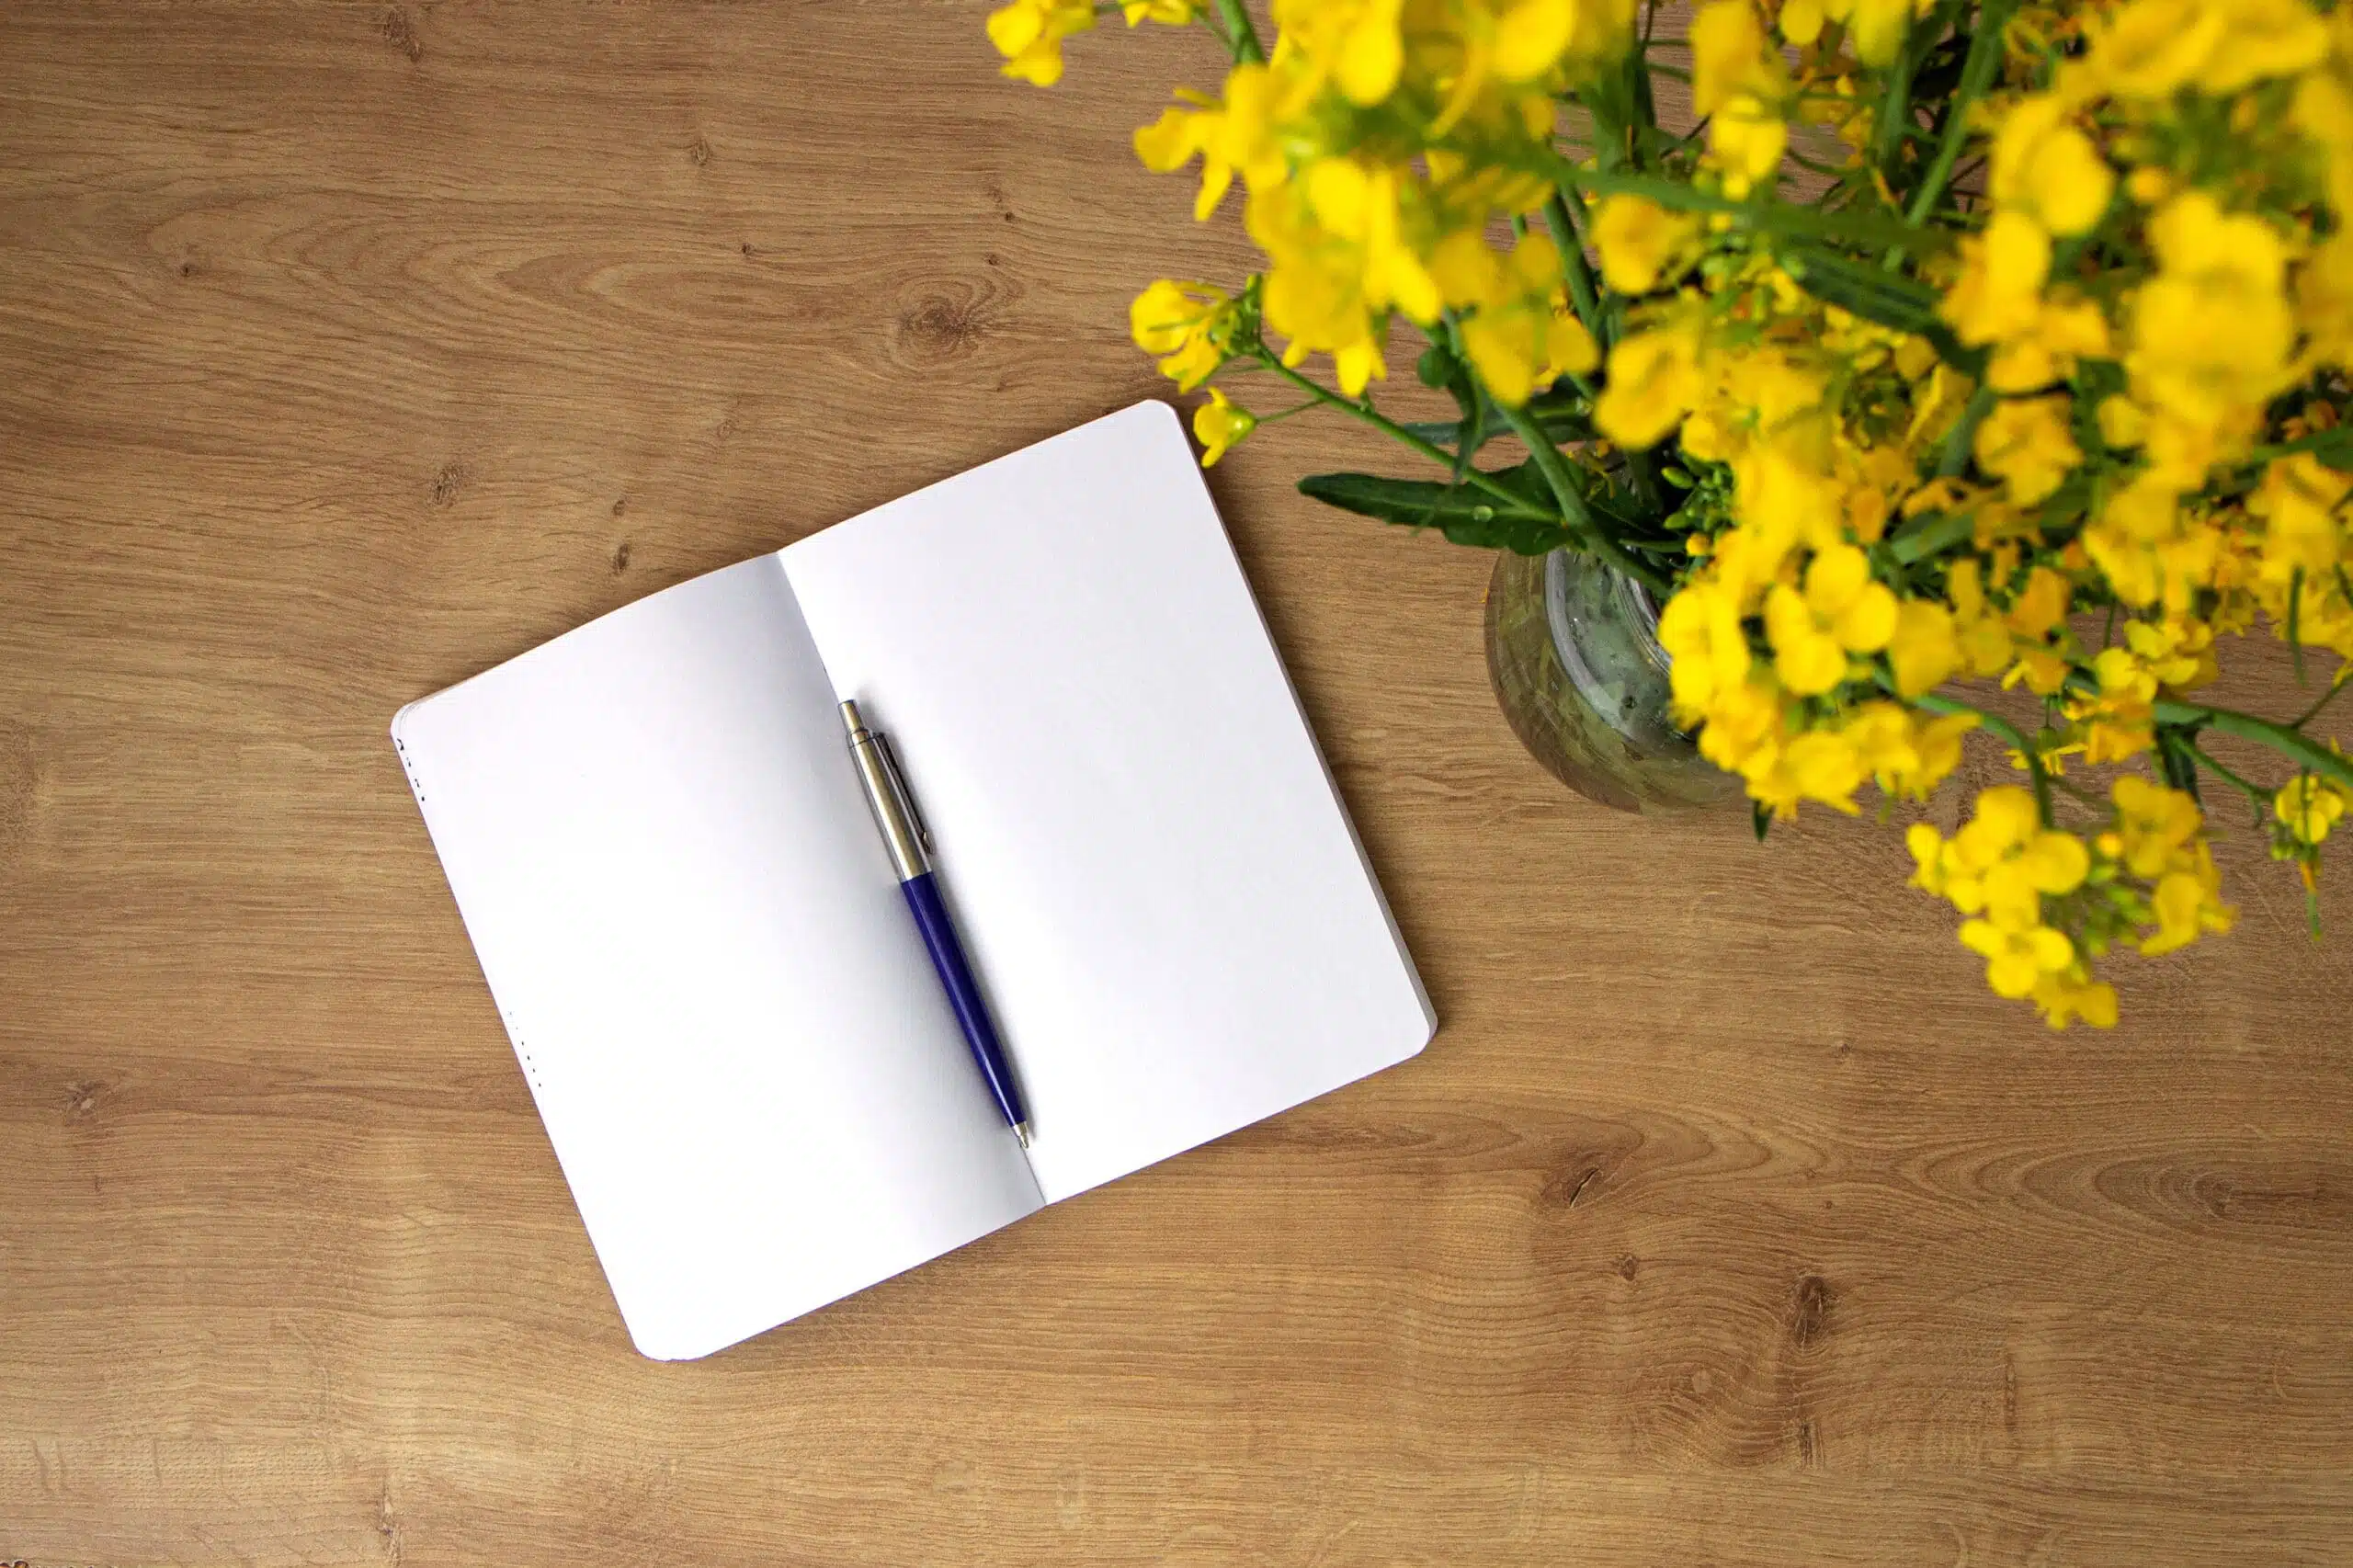 Open notebook with clean leaves with yellow flowers rapeseed on wooden table